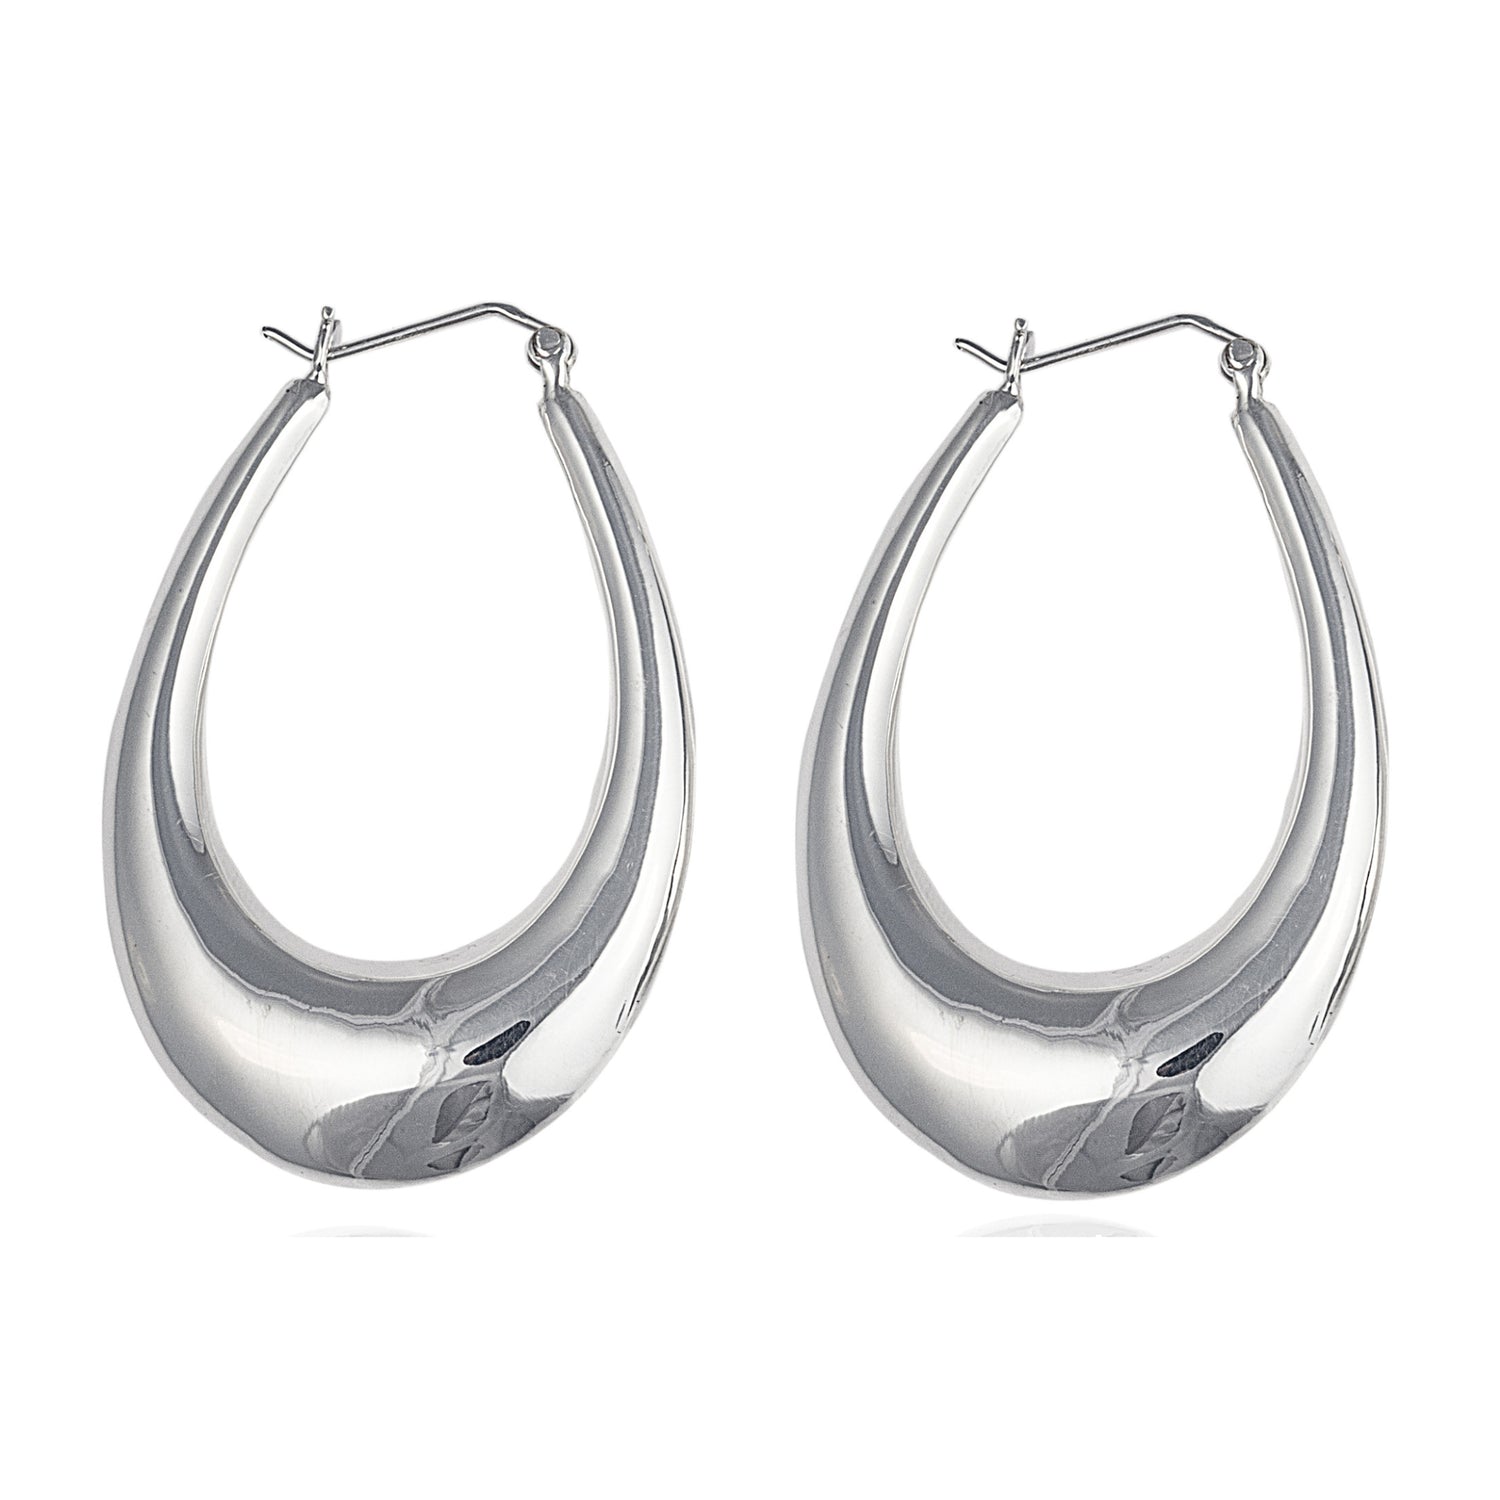 The Angel Hoop earrings are made of 925 sterling silver and are supremely comfortable to wear. The versatile Aztec design can be dressed both up or dressed down for a more casual look. Result: A Silver Lovers Basic